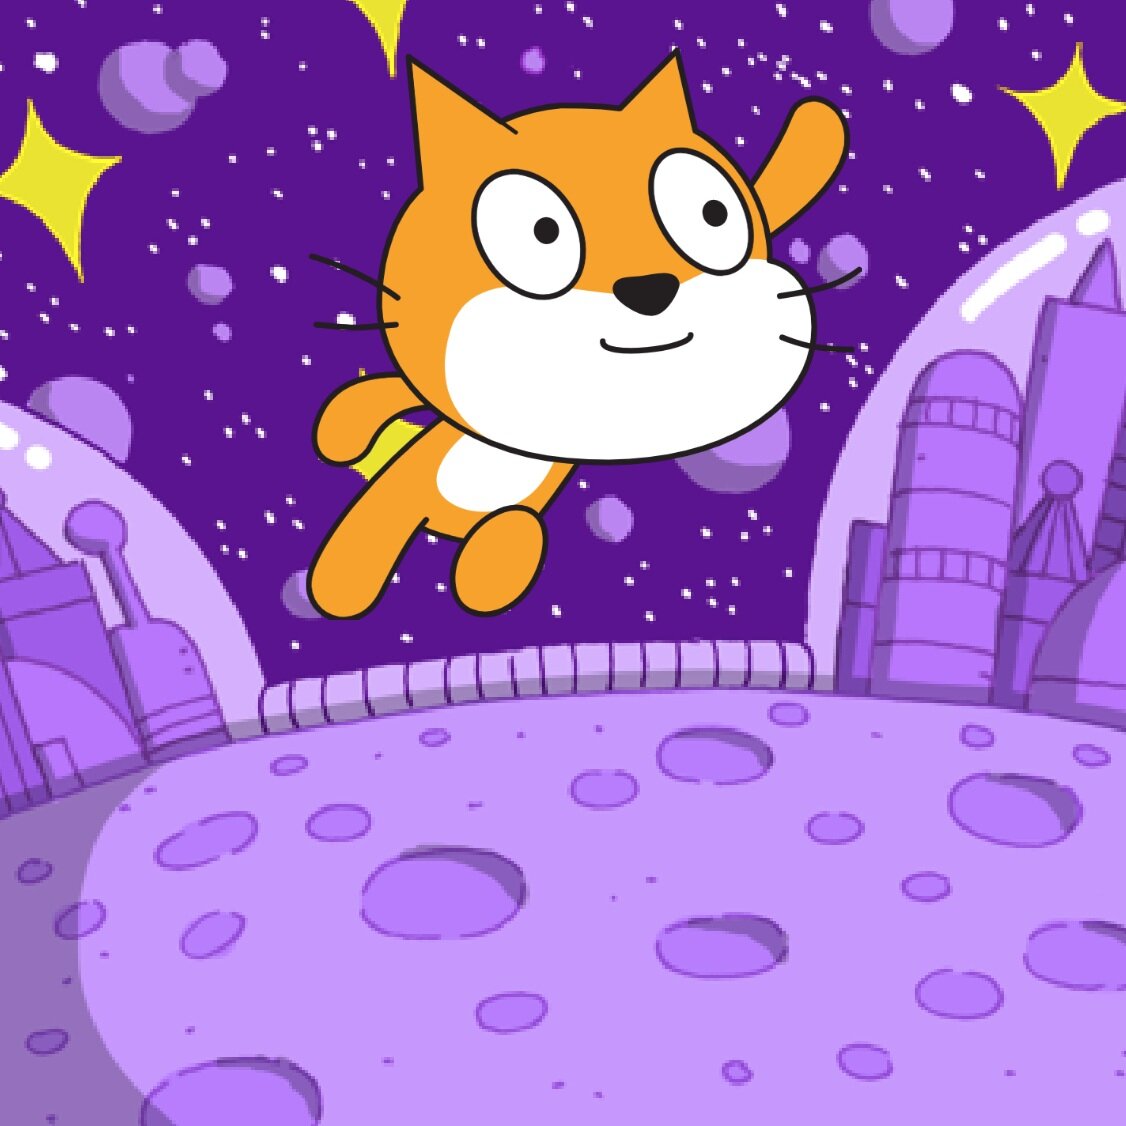 how to make a big game in scratch